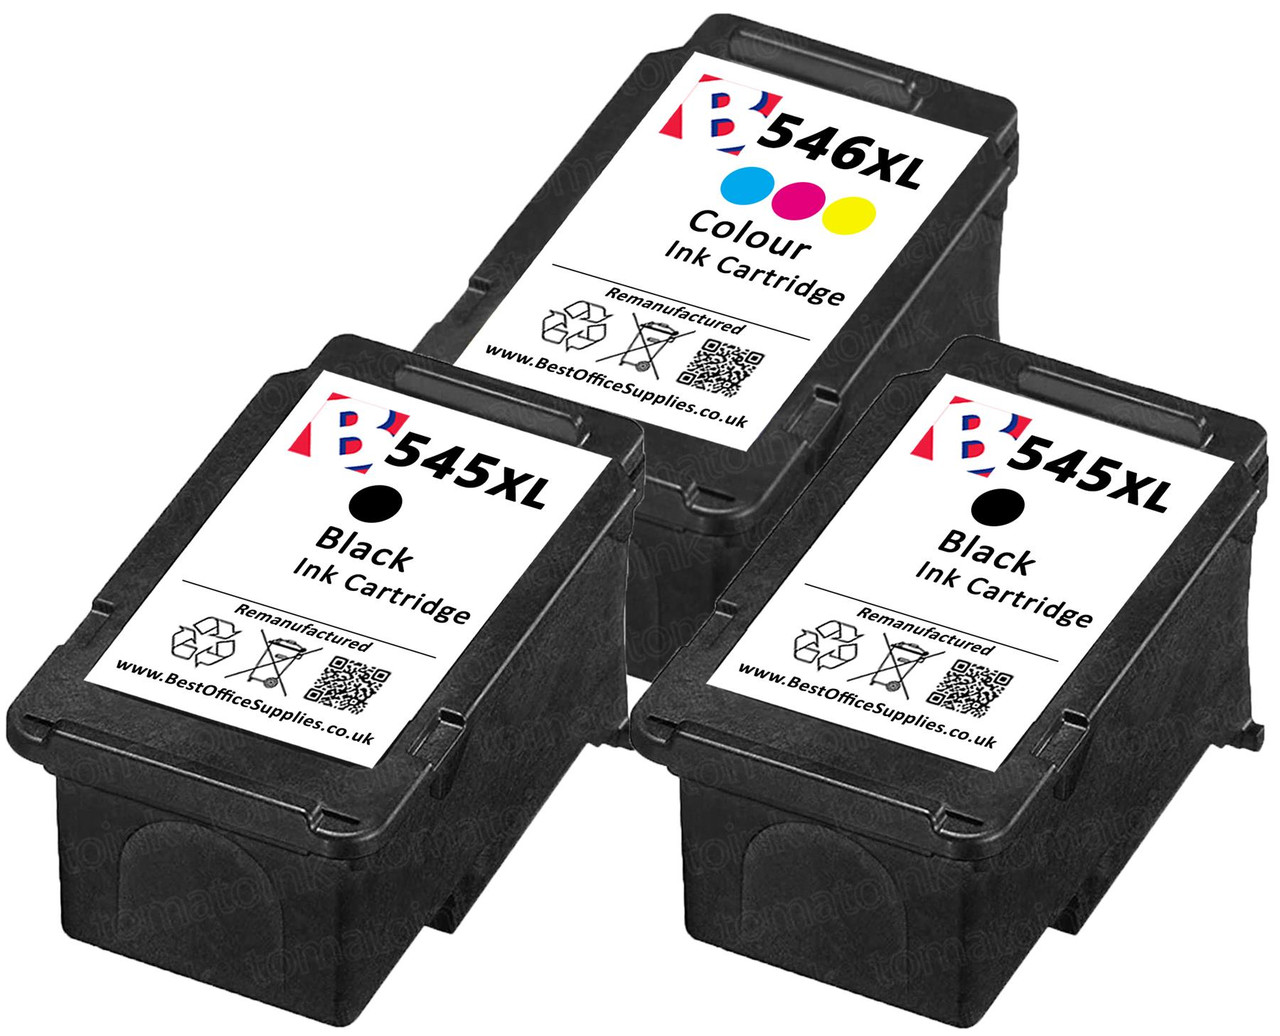 Canon PG-545 XL / CL-546 XL Remanufactured Ink Cartridges 3-Pack